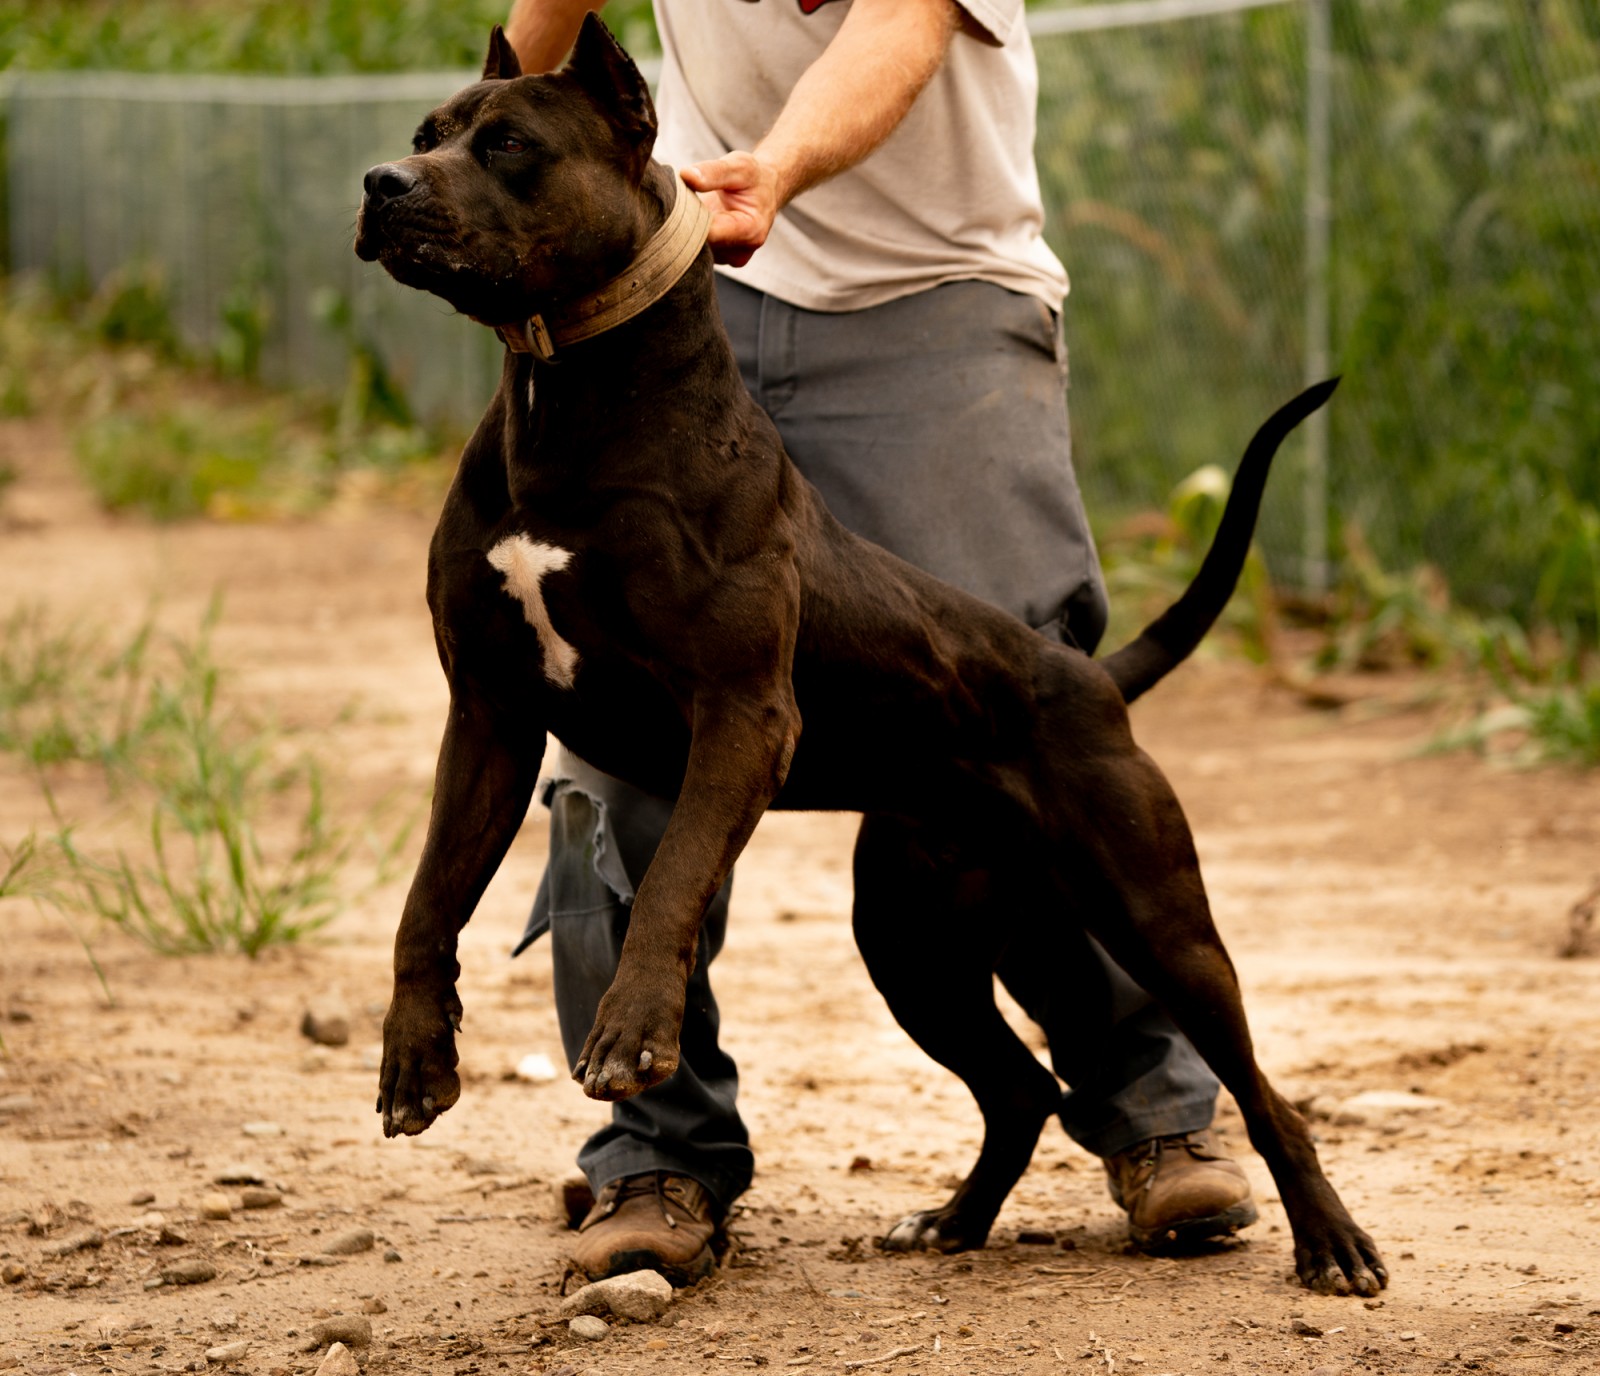 Hitman, a black XL pitbull from Unleashed kennelz lunges, ripped muscles flexed, in a side profile shot with his owner holding him by the green collar. 